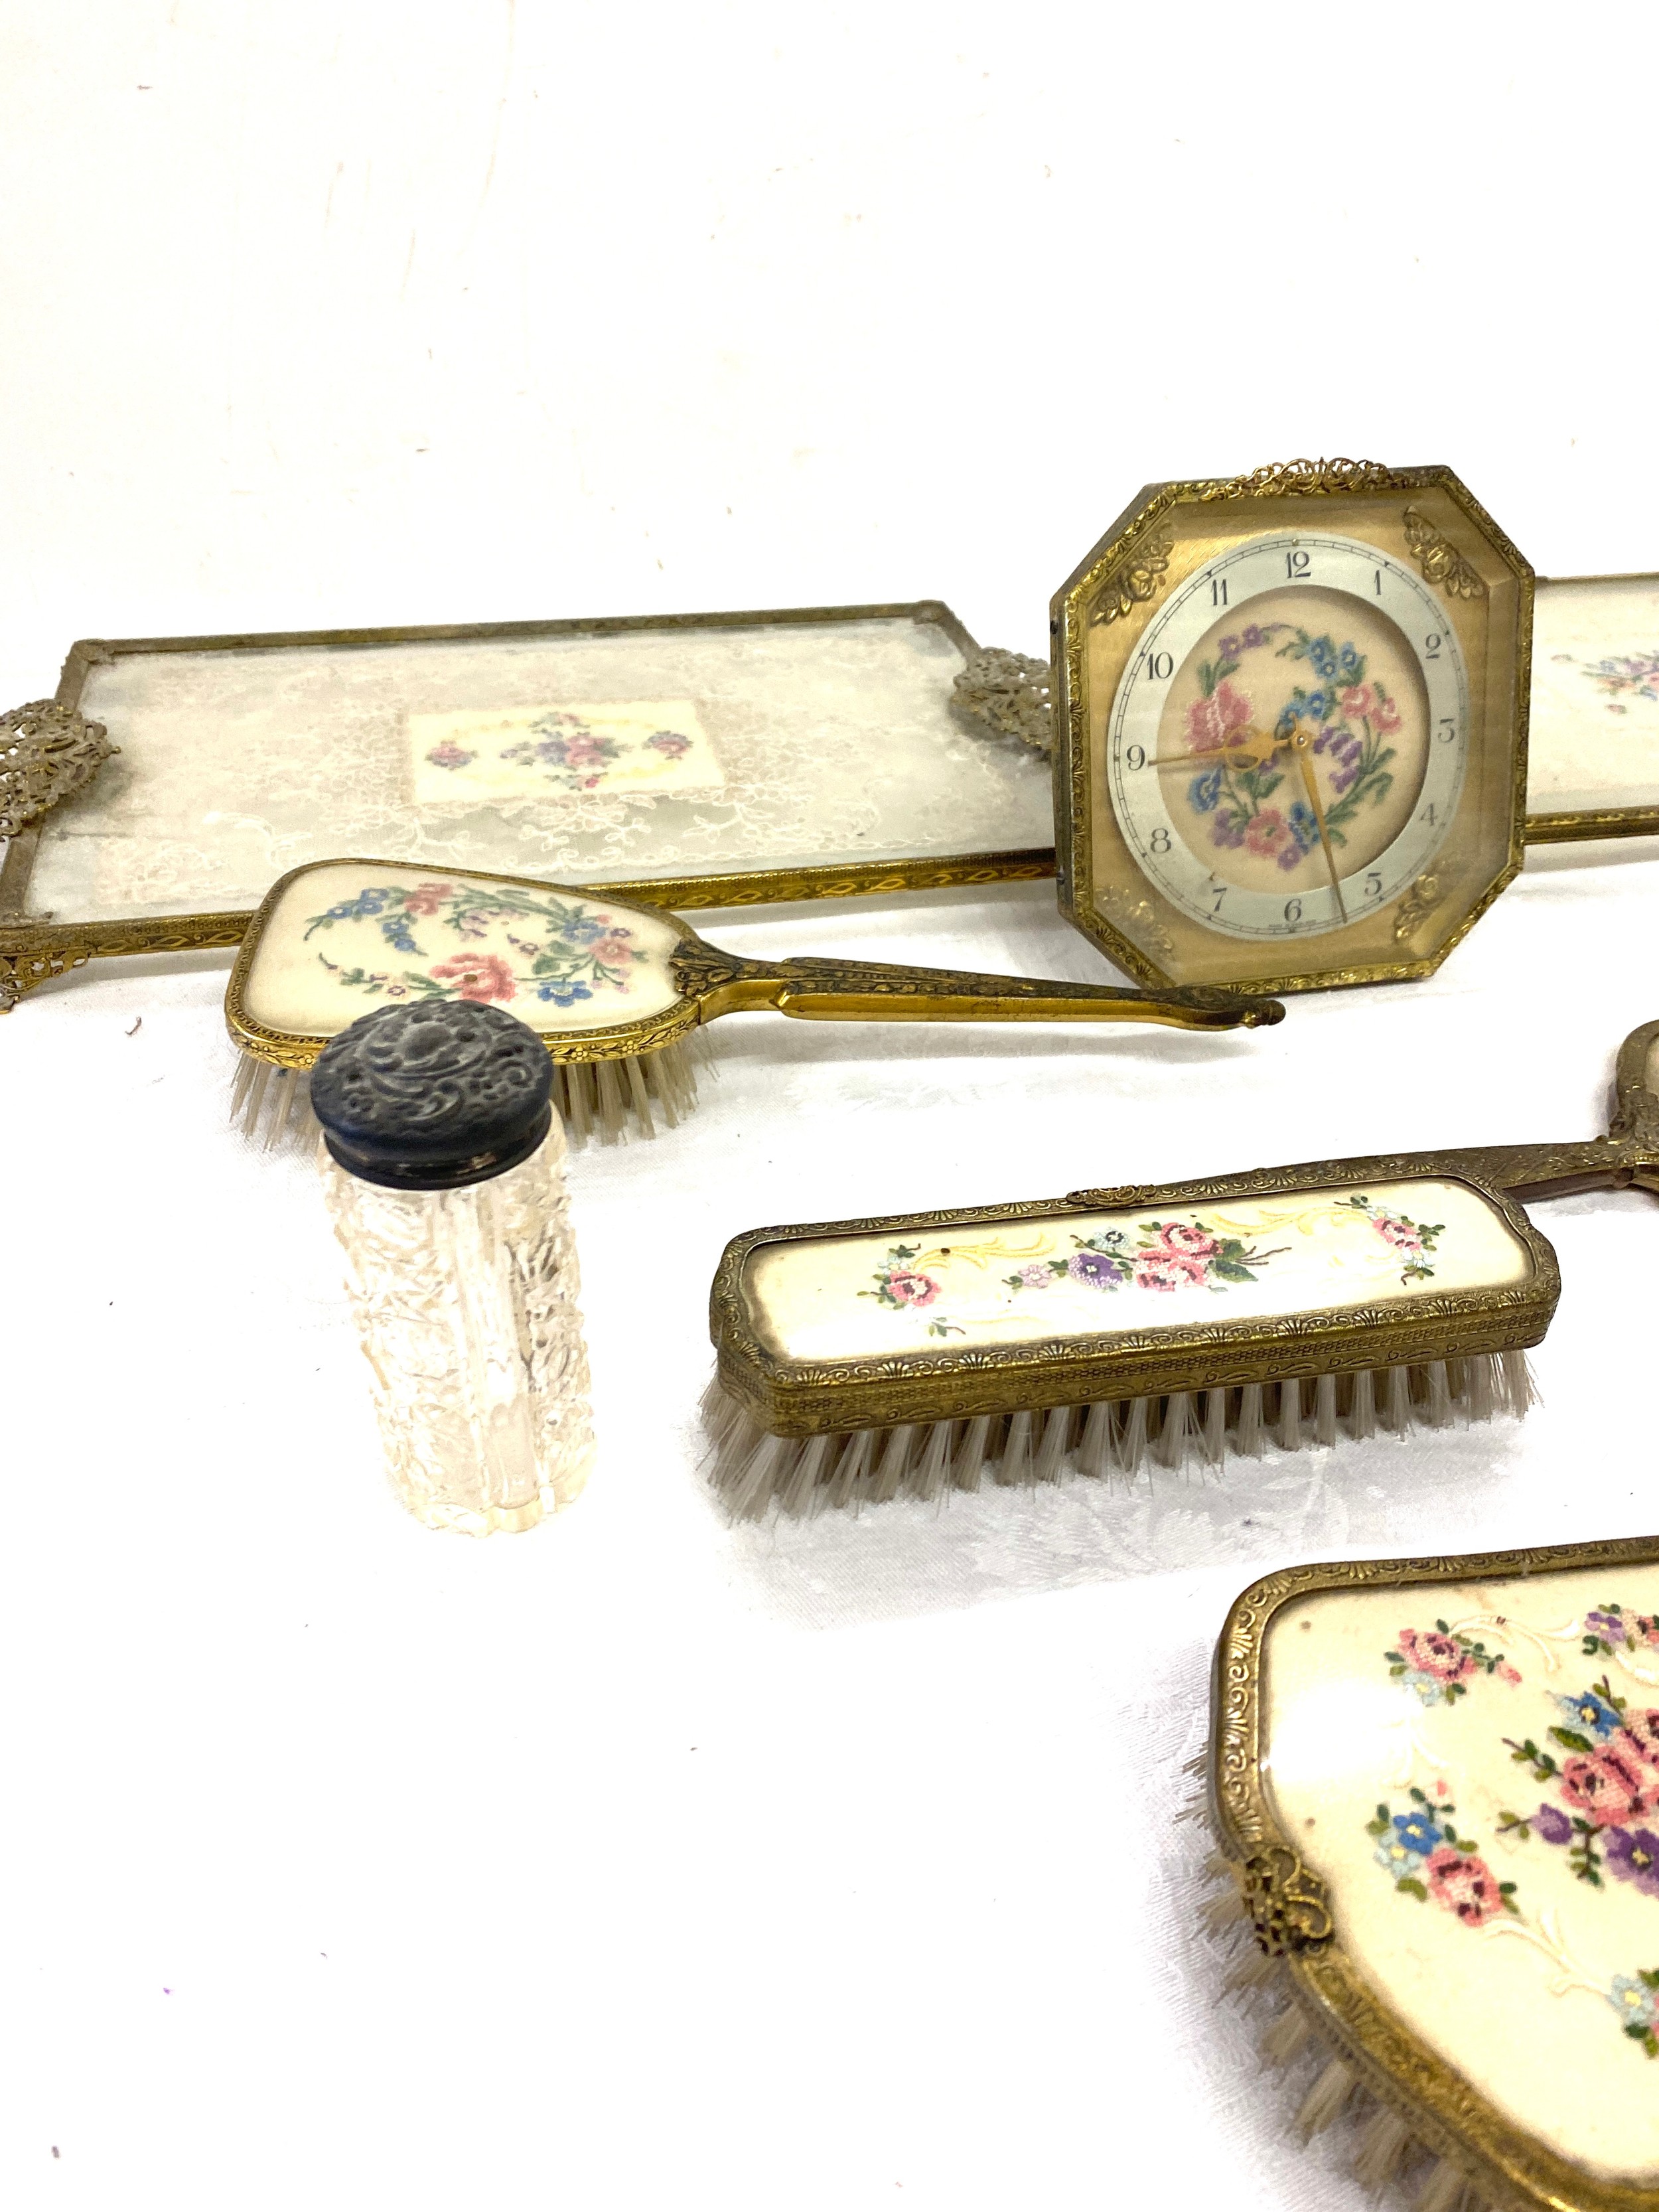 Vintage dressing table set with clock, brushes, tray etc - Image 3 of 5